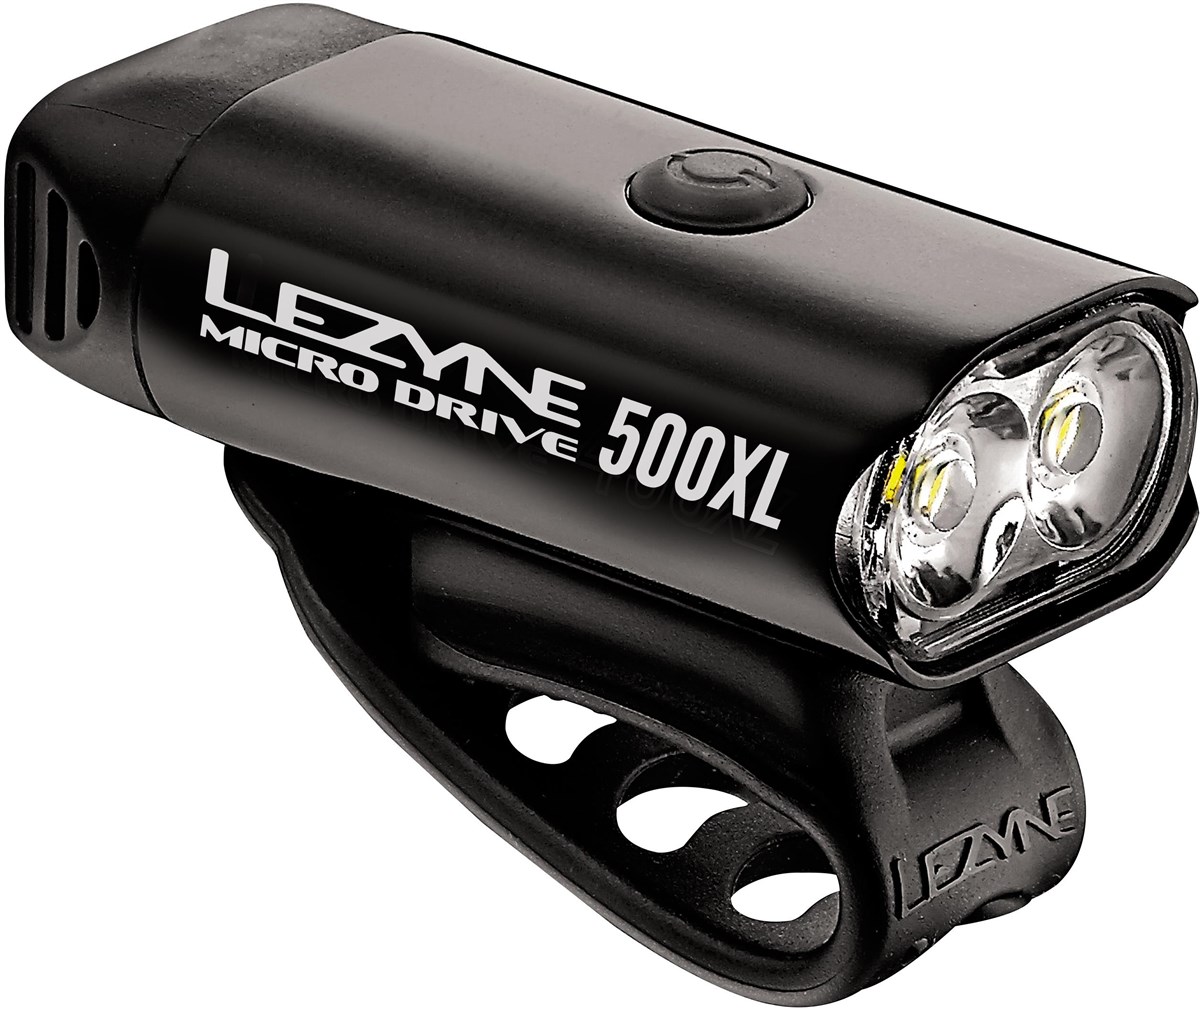 Lezyne Micro 500 Front Light product image